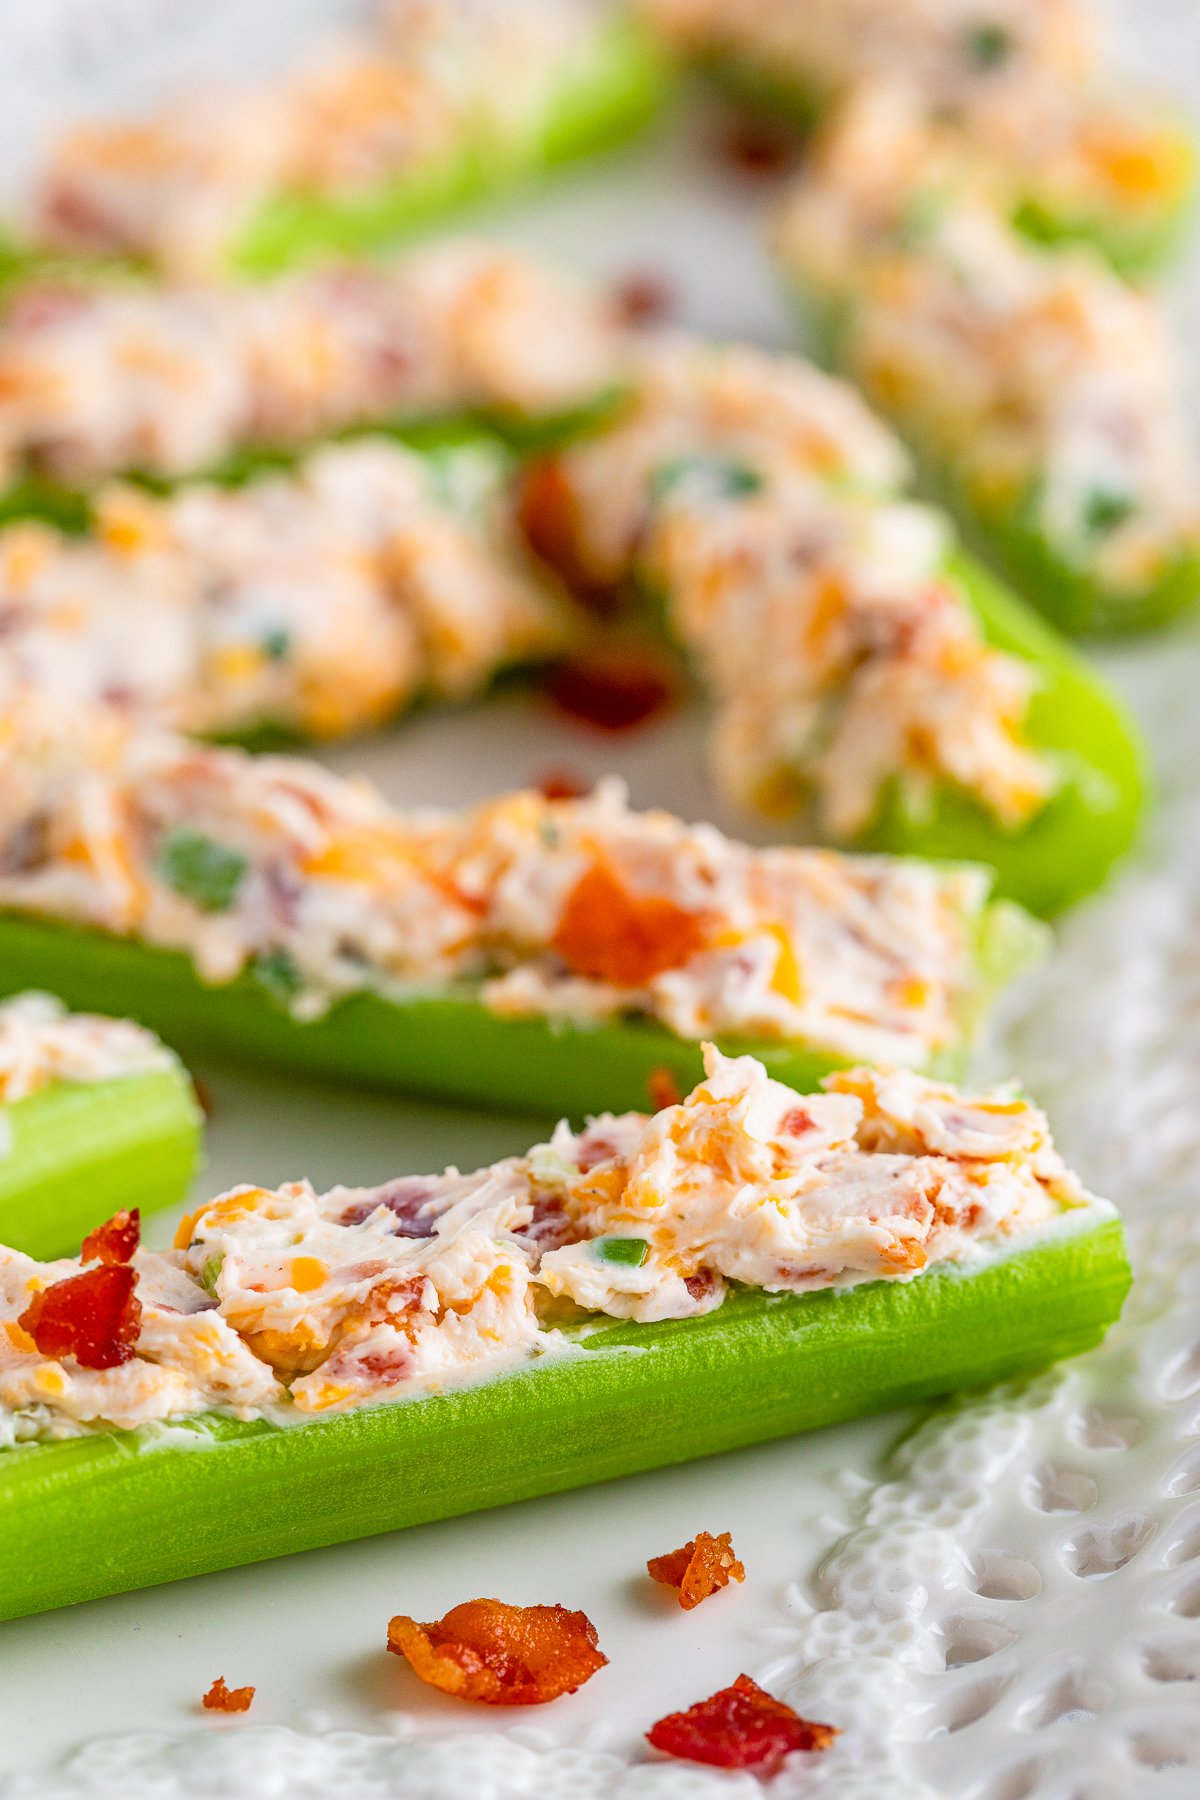 Close up of Stuffed Celery Sticks on platter showing stuffing ingredients.